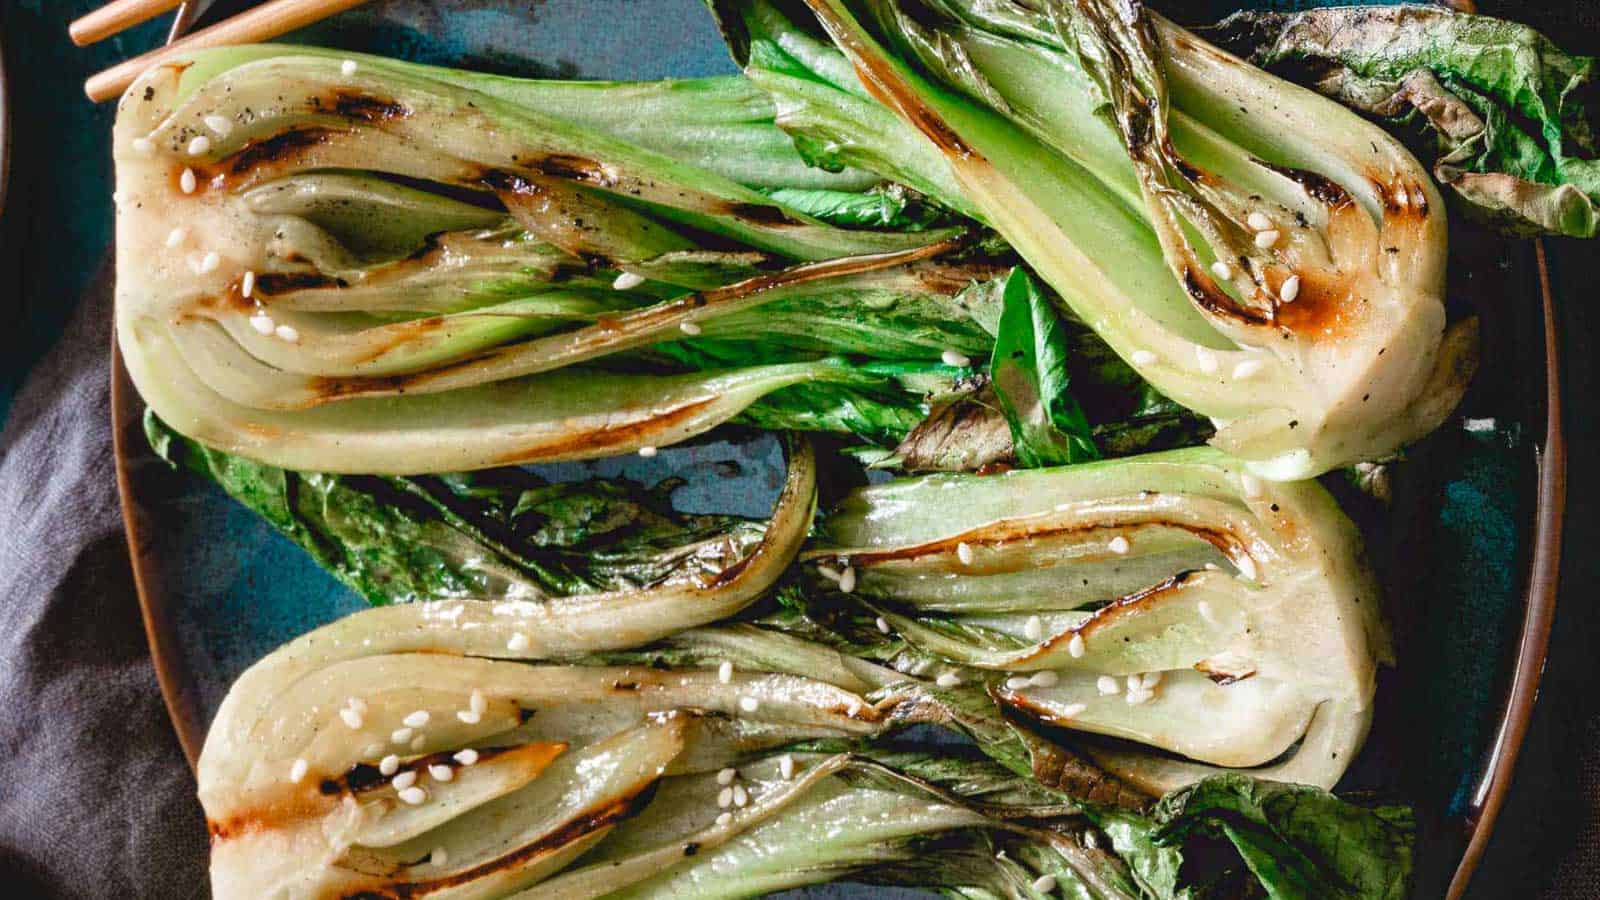 Grilled baby bok choy garnished with sesame seeds.